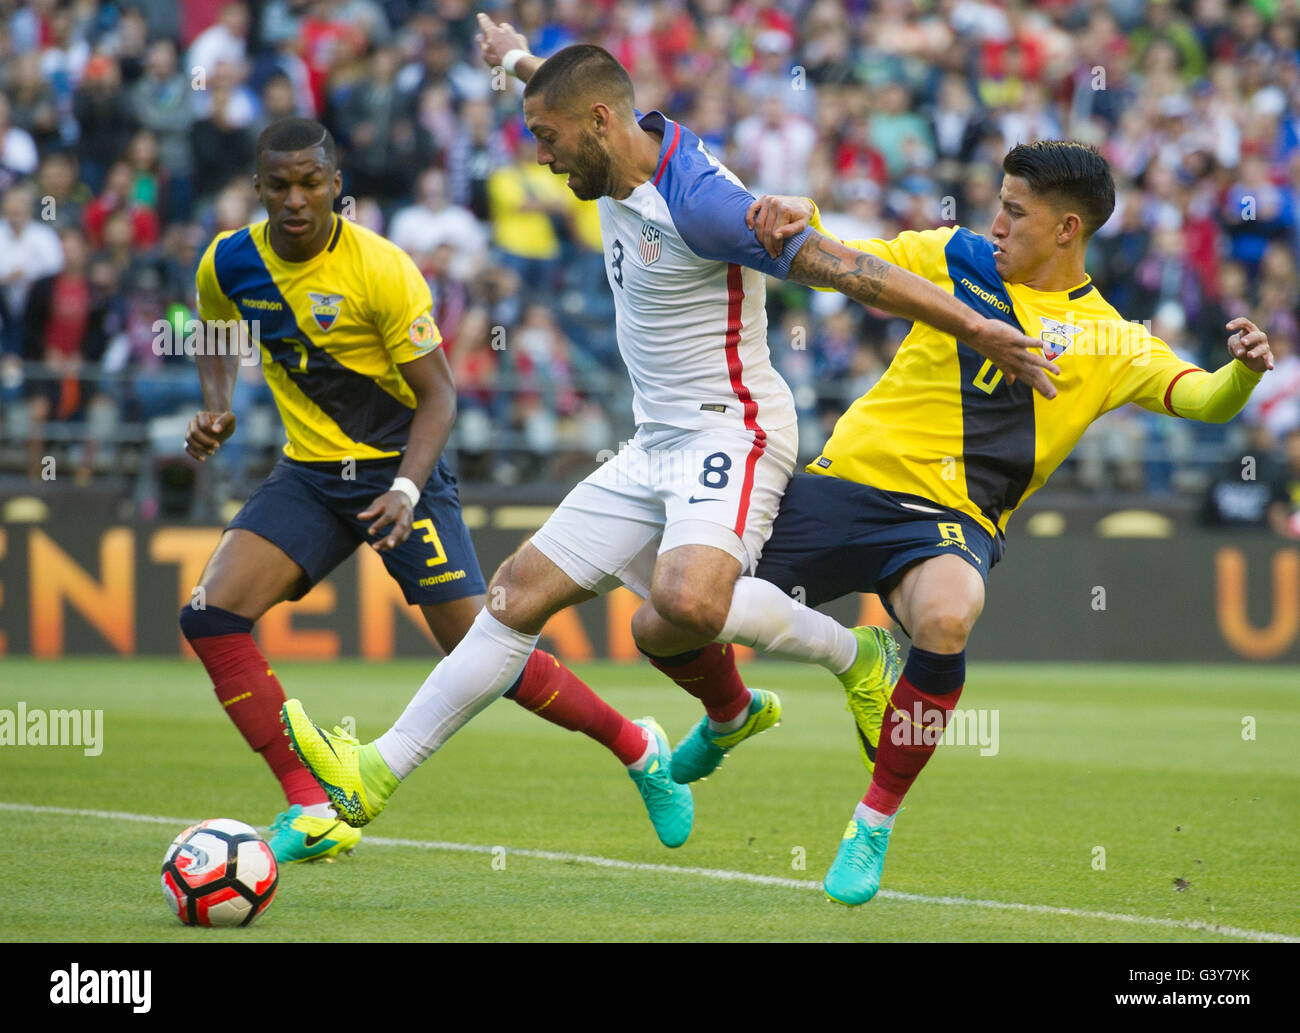 Seattle, USA. 16th June, 2016. Clint Dempsey (C) of the United States vies with Fernando Gaibor of Ecuador during a quarterfinal of the 2016 Copa America soccer tournament at the Century Link Field in Seattle, the United States, June 16, 2016. The United States won 2-1. Credit:  Yang Lei/Xinhua/Alamy Live News Stock Photo